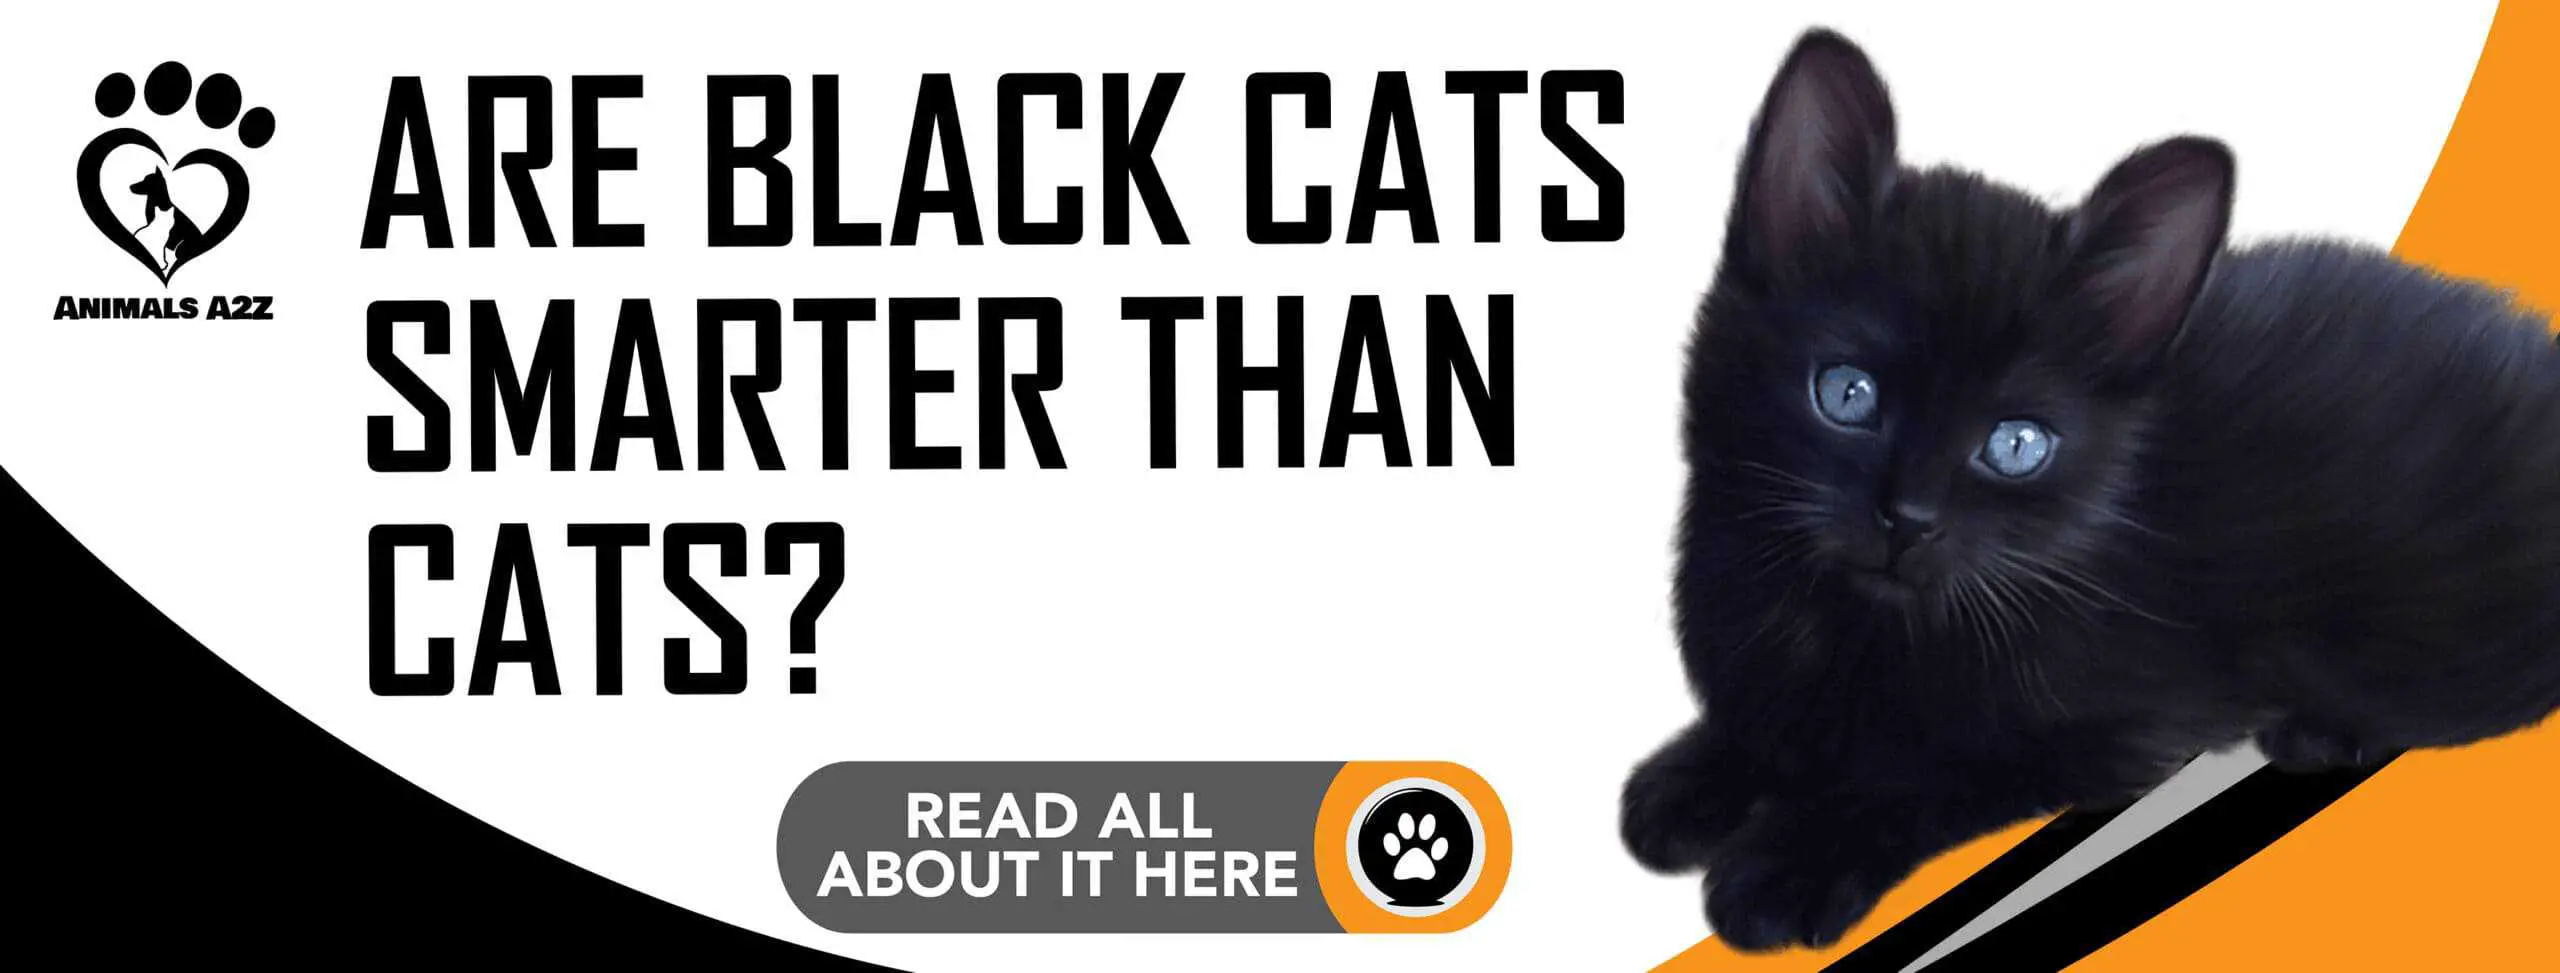 Are black cats smarter than cats